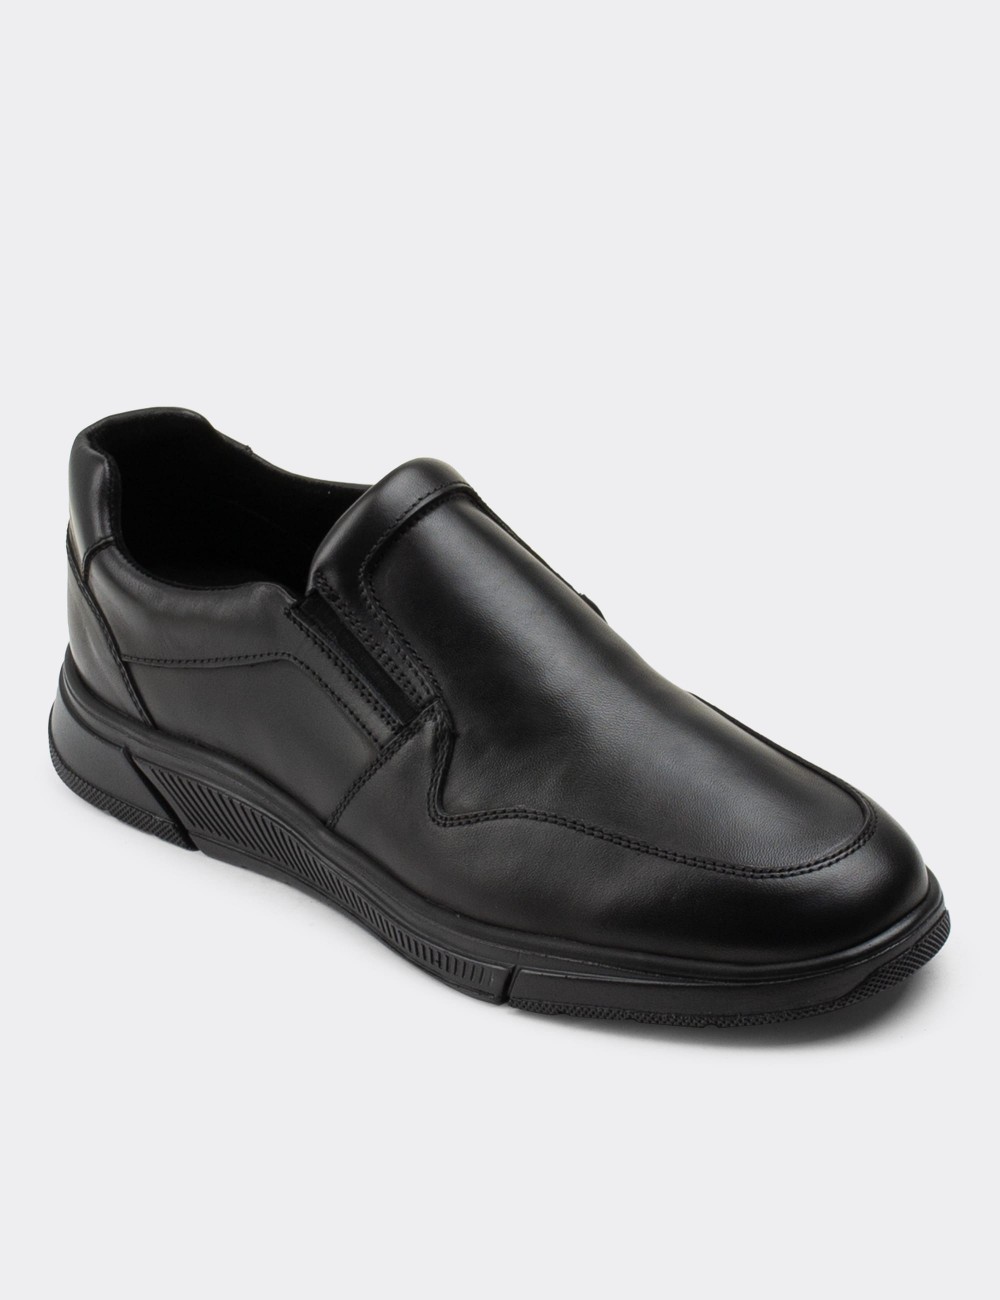 Black  Leather Loafers - 01874MSYHC01